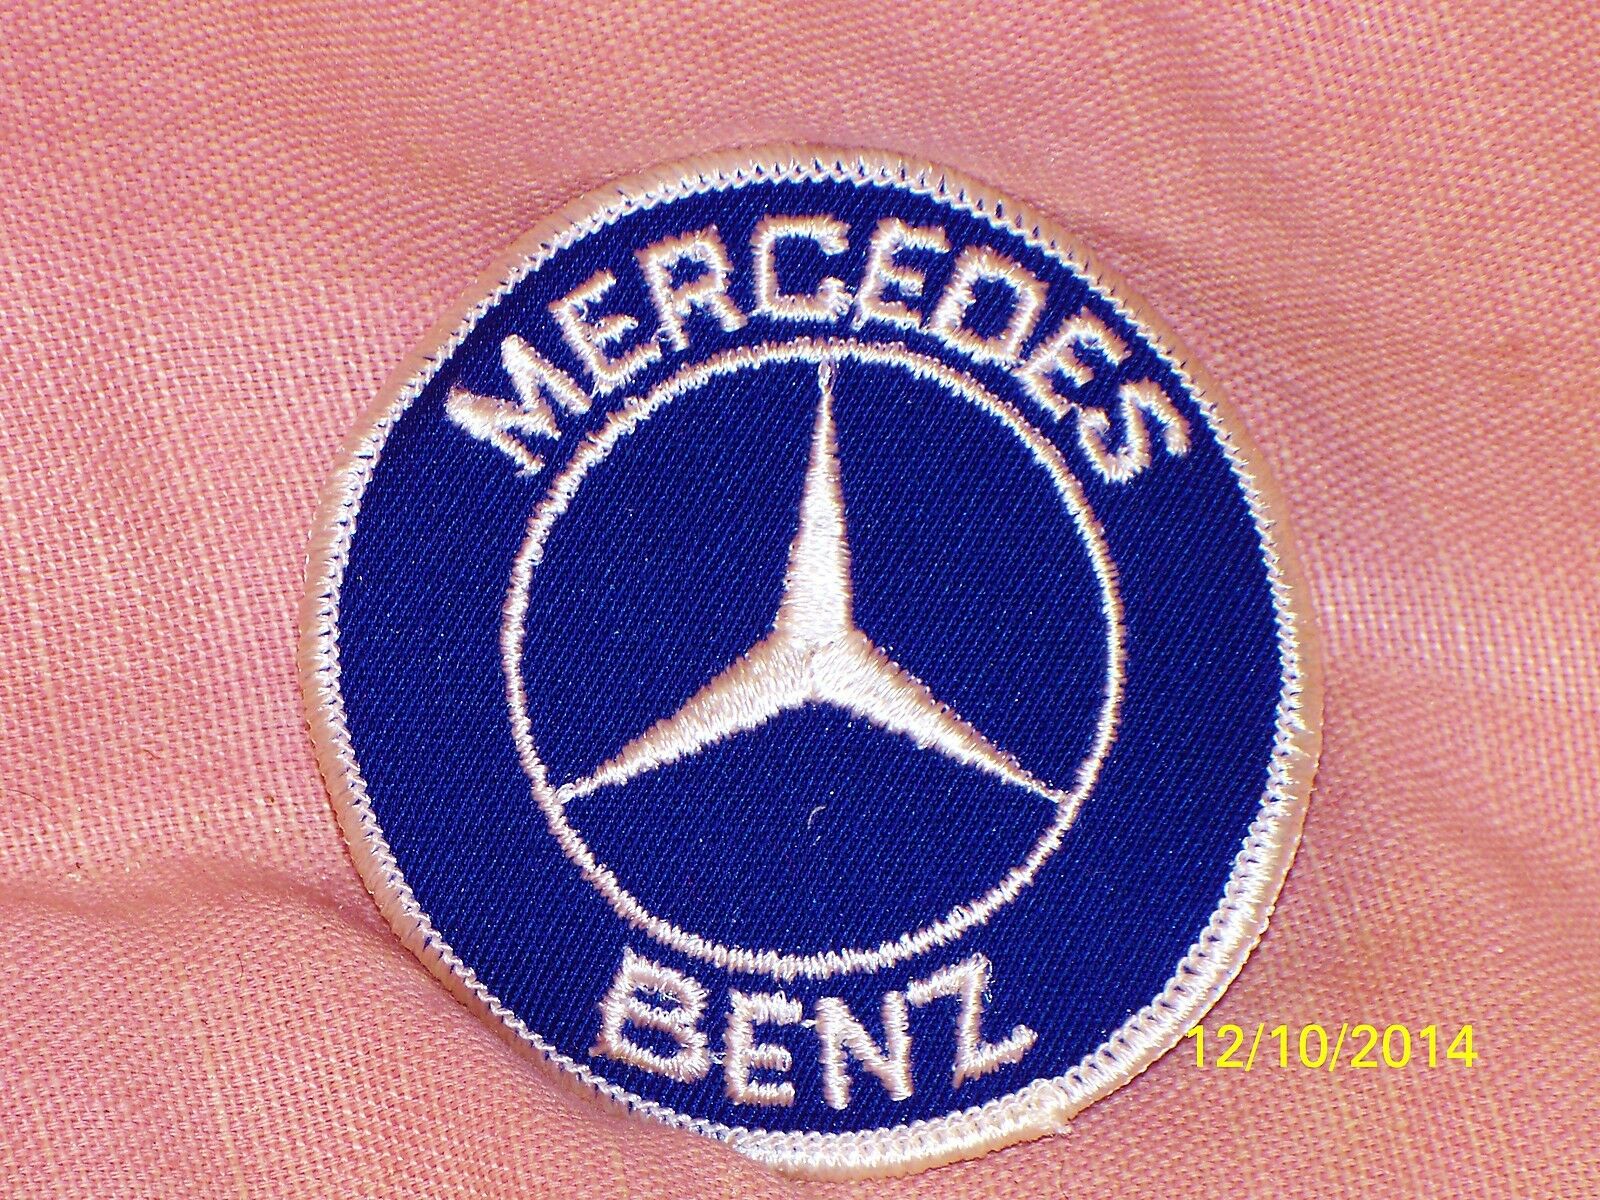 Vintage Mercedes Benz Embroidered Iron-on Patch Blue White  2 7/8" Diameter